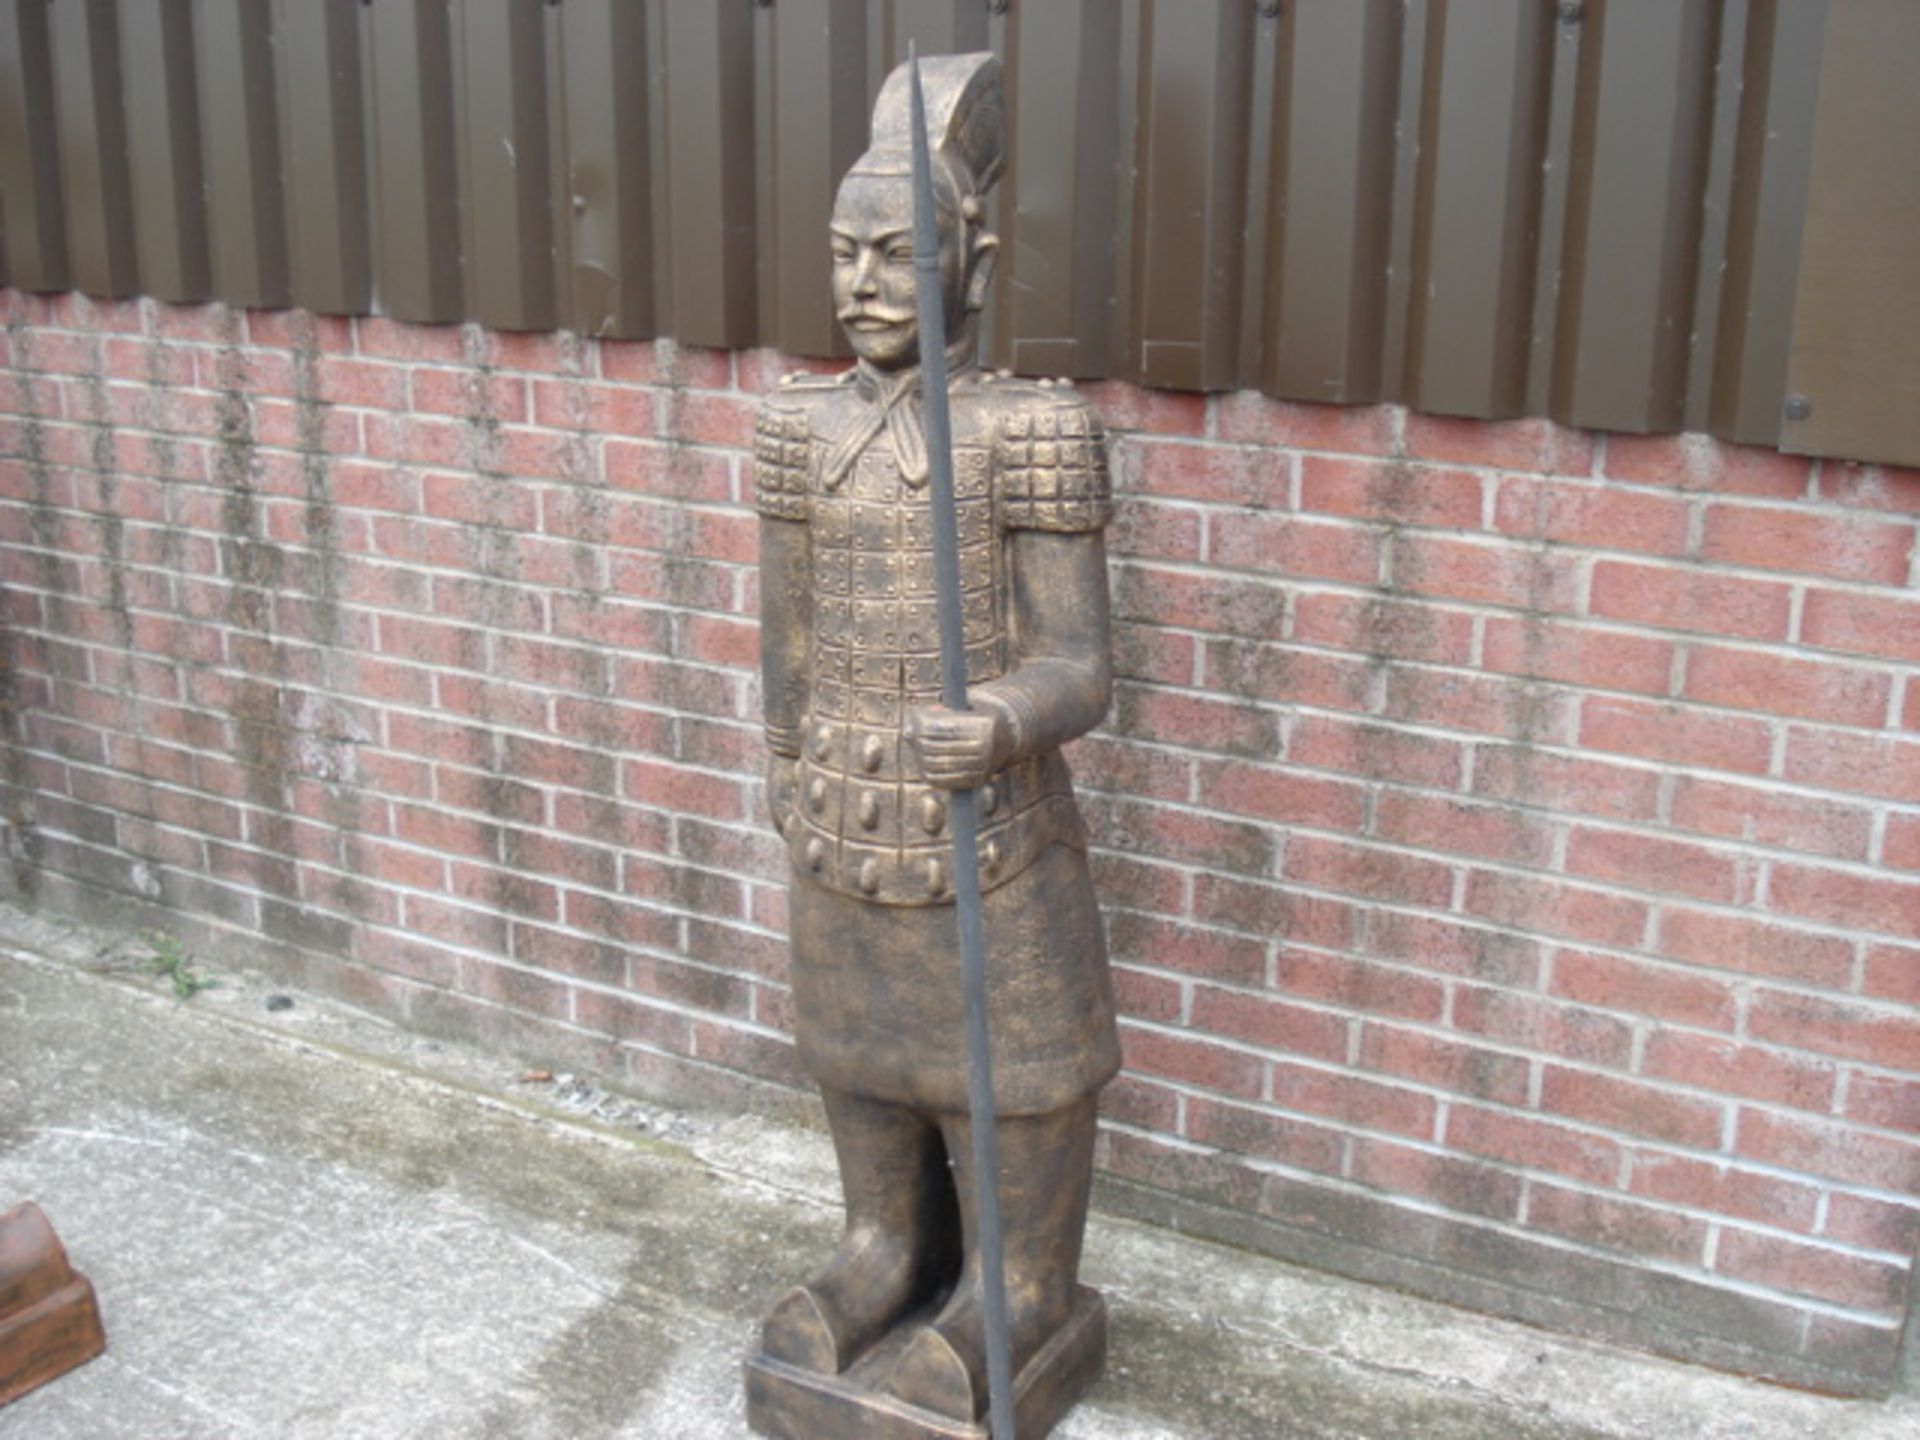 CRATED NEW LARGE TERRECOTTA WARRIOR STATUE IN BRONZE FINISH